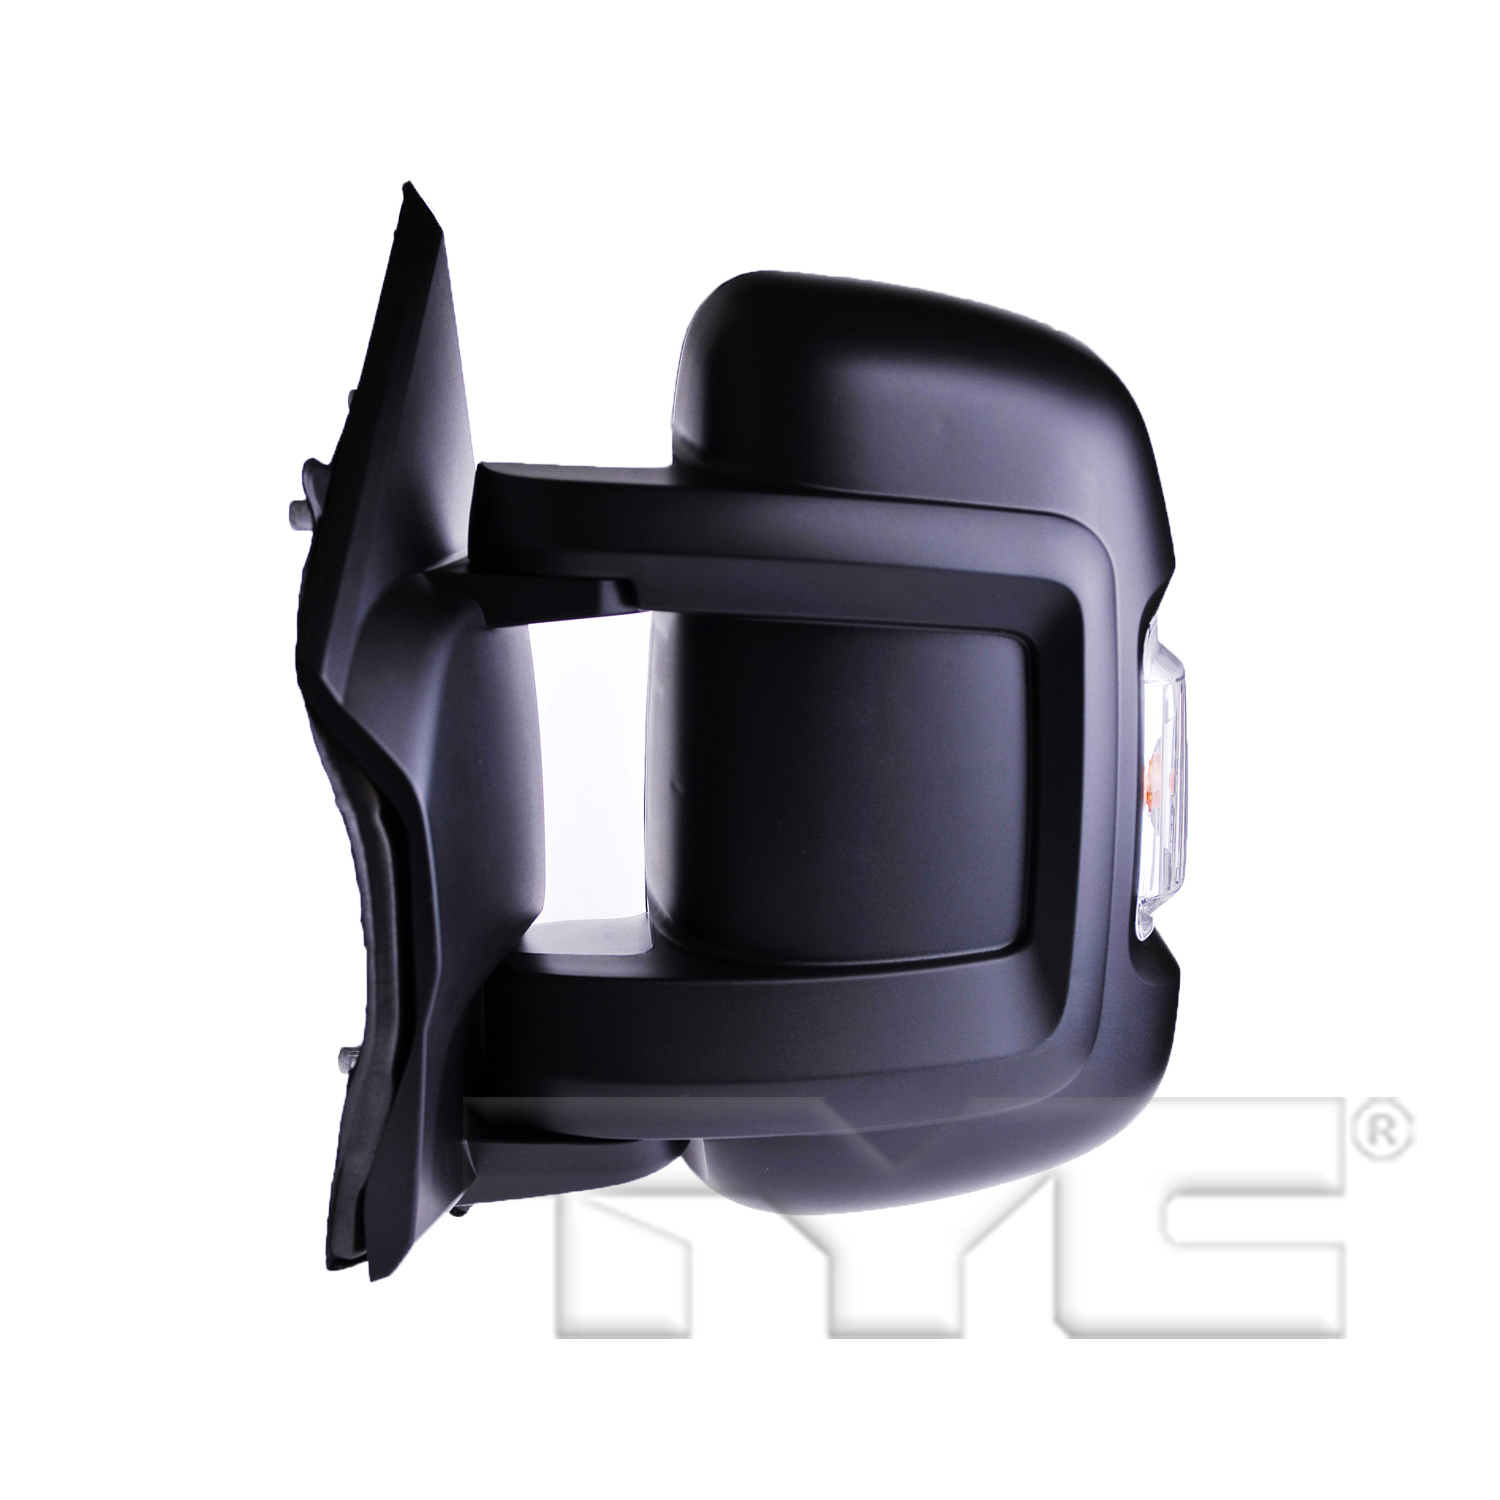 Aftermarket MIRRORS for RAM - PROMASTER 2500, PROMASTER 2500,14-23,LT Mirror outside rear view